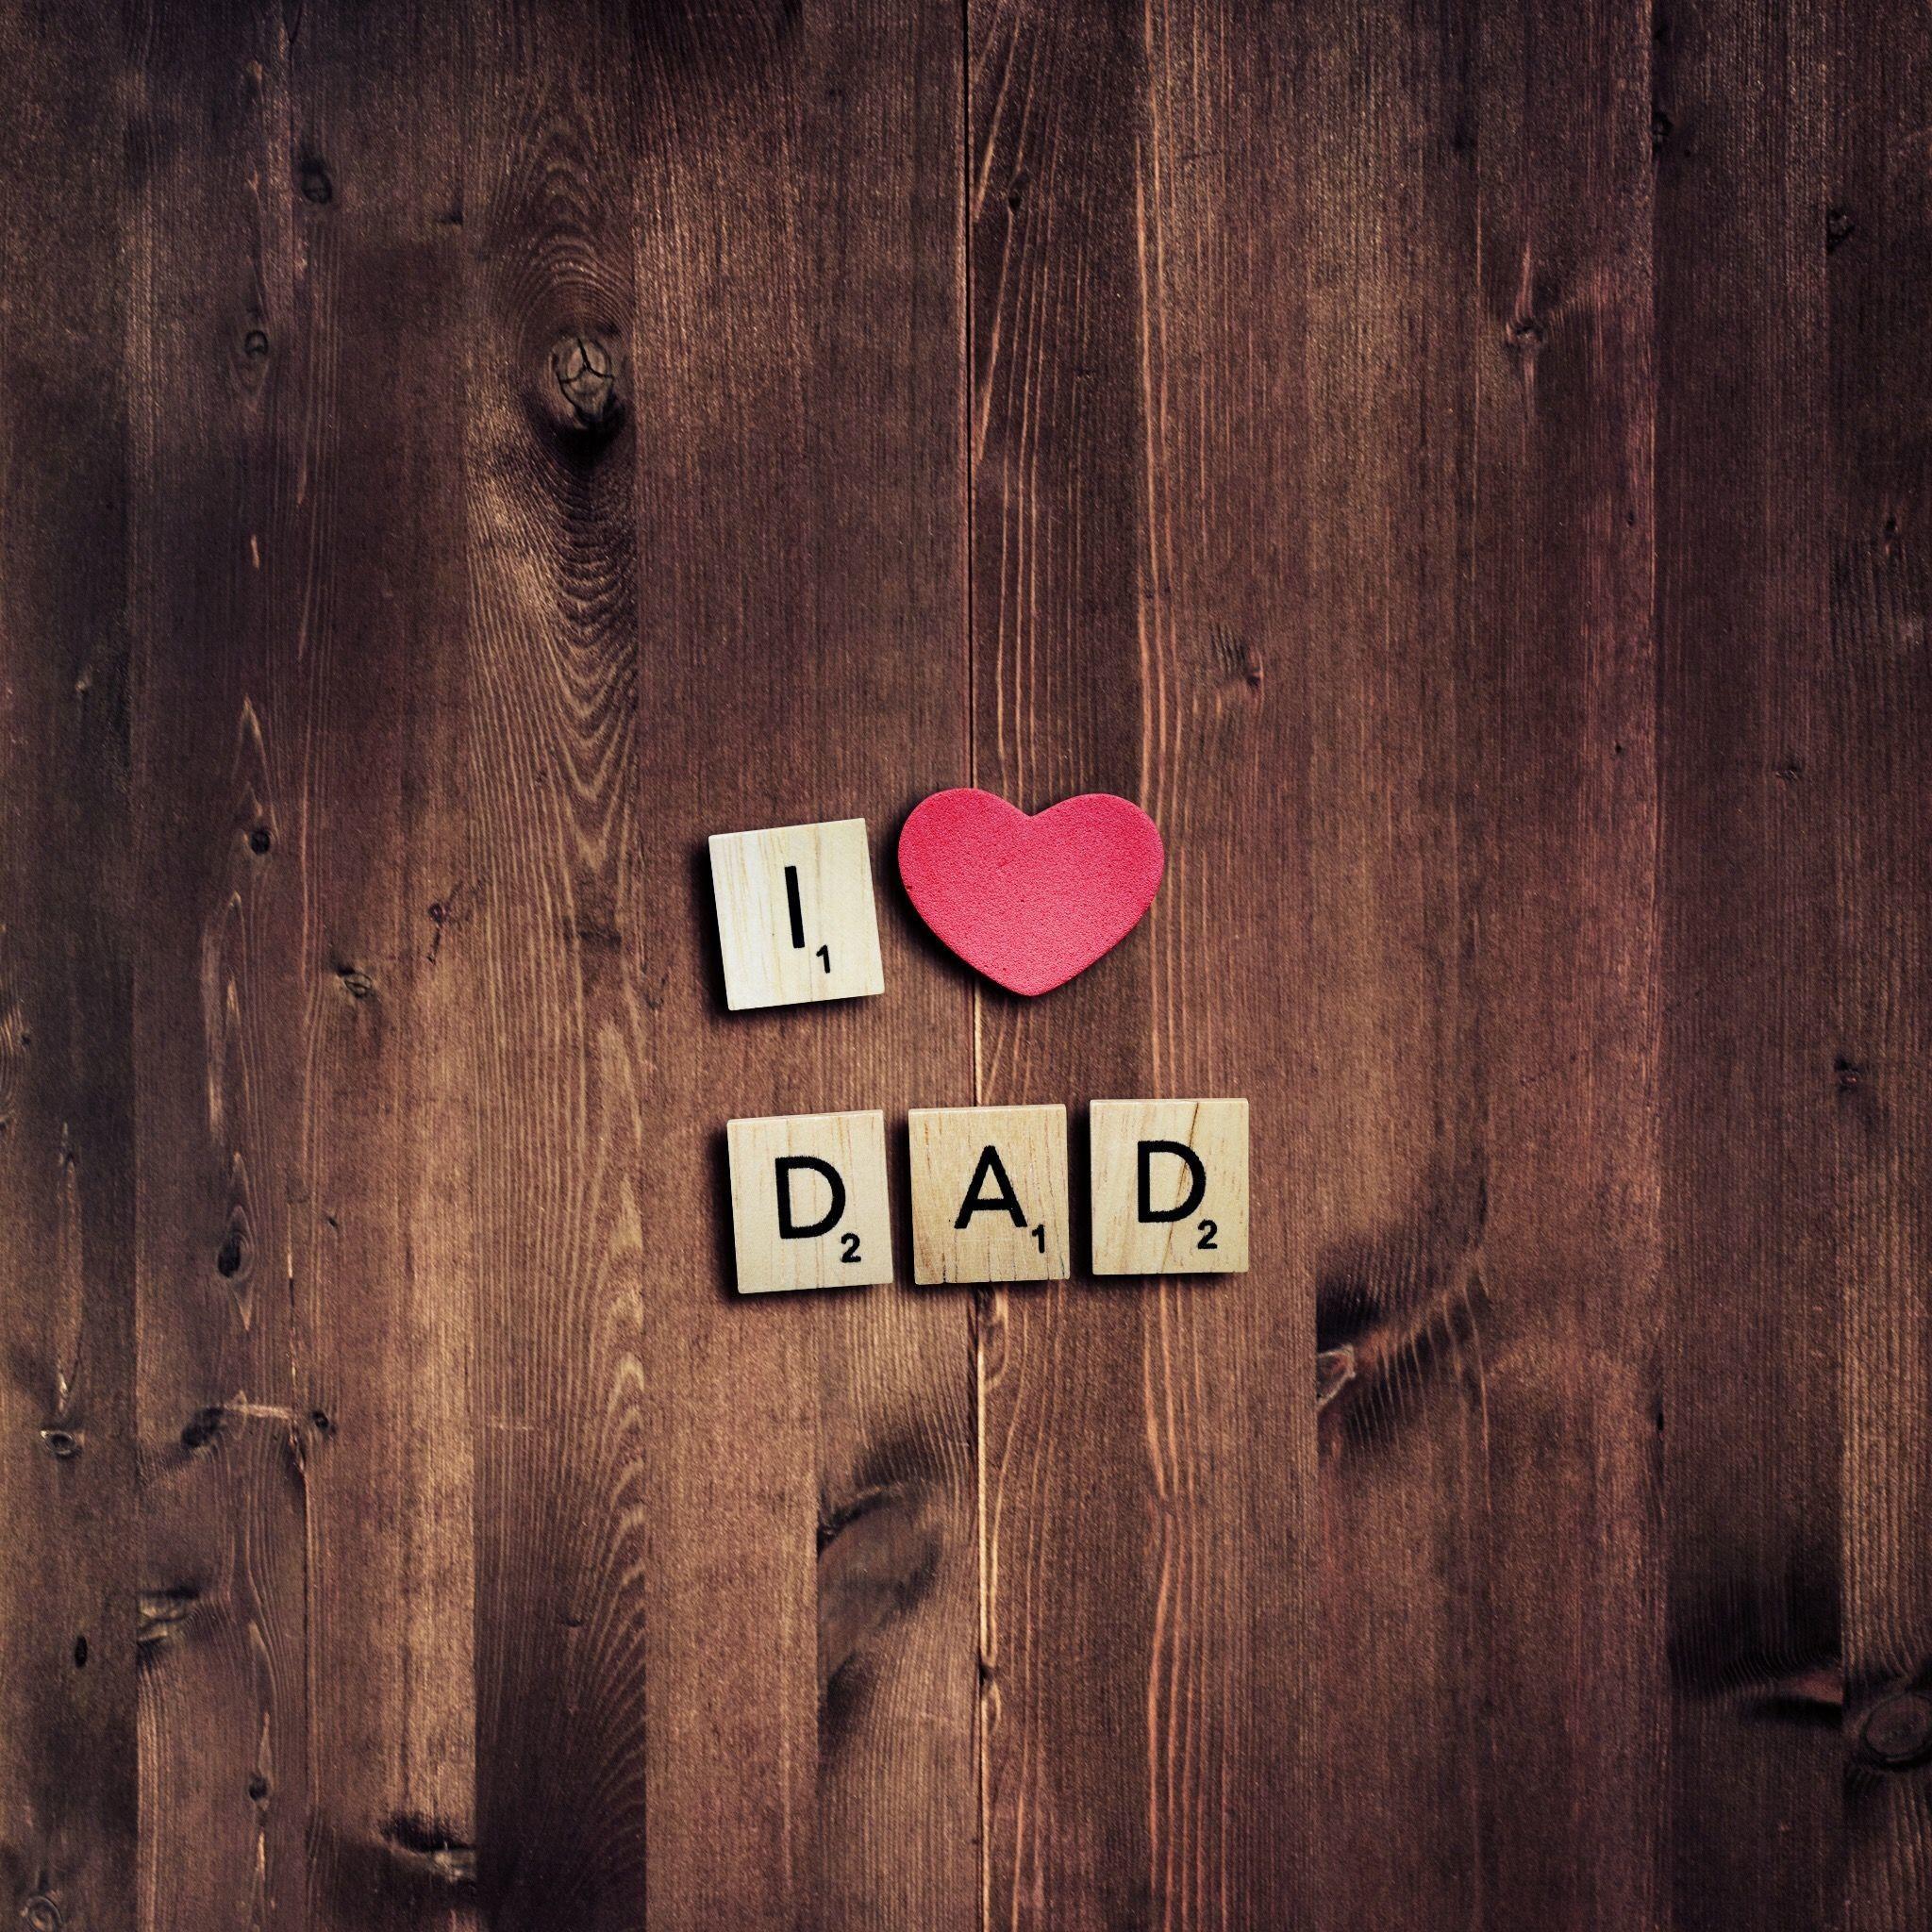 I Love Dad Wallpapers - Top Free I Love Dad Backgrounds - WallpaperAccess